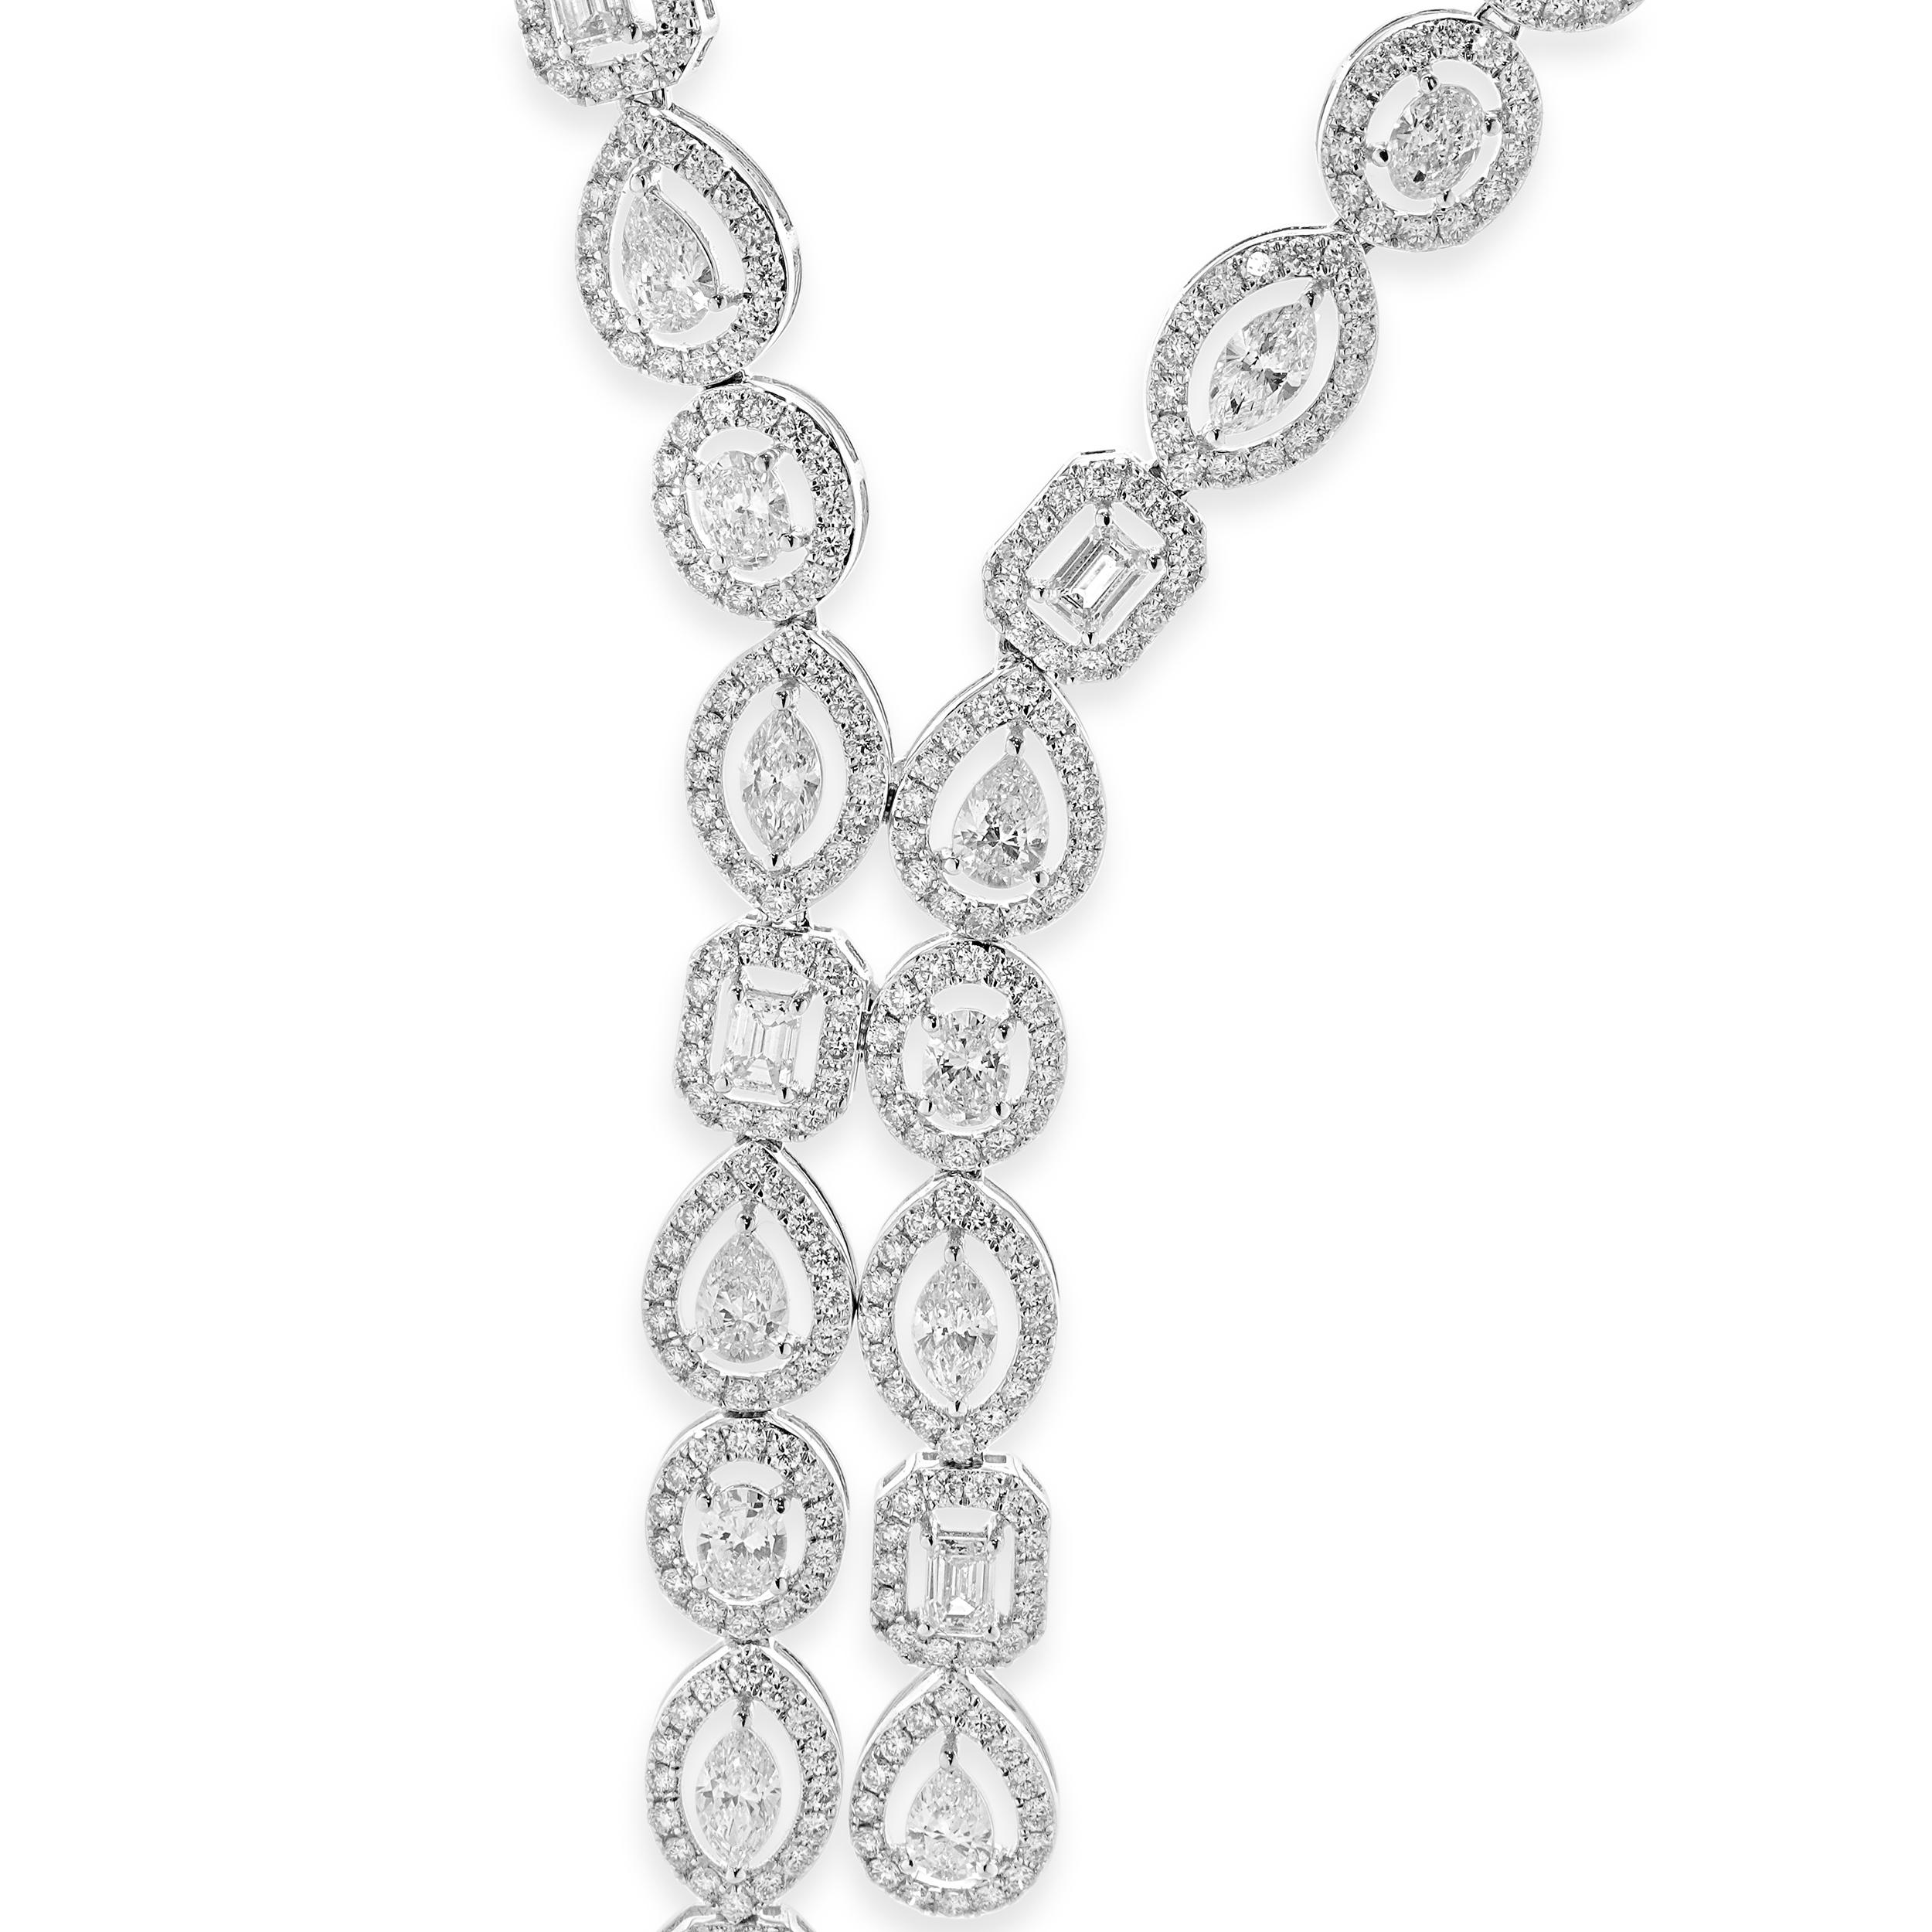 Designer: custom
Material: 14K white gold
Diamonds:  Multi-Shaped and round brilliant Diamonds= 17.97cttw
Color: G
Clarity:VS-SI1
Dimensions: necklace measures 16.5-inches in length 
Weight: 32.22 grams
